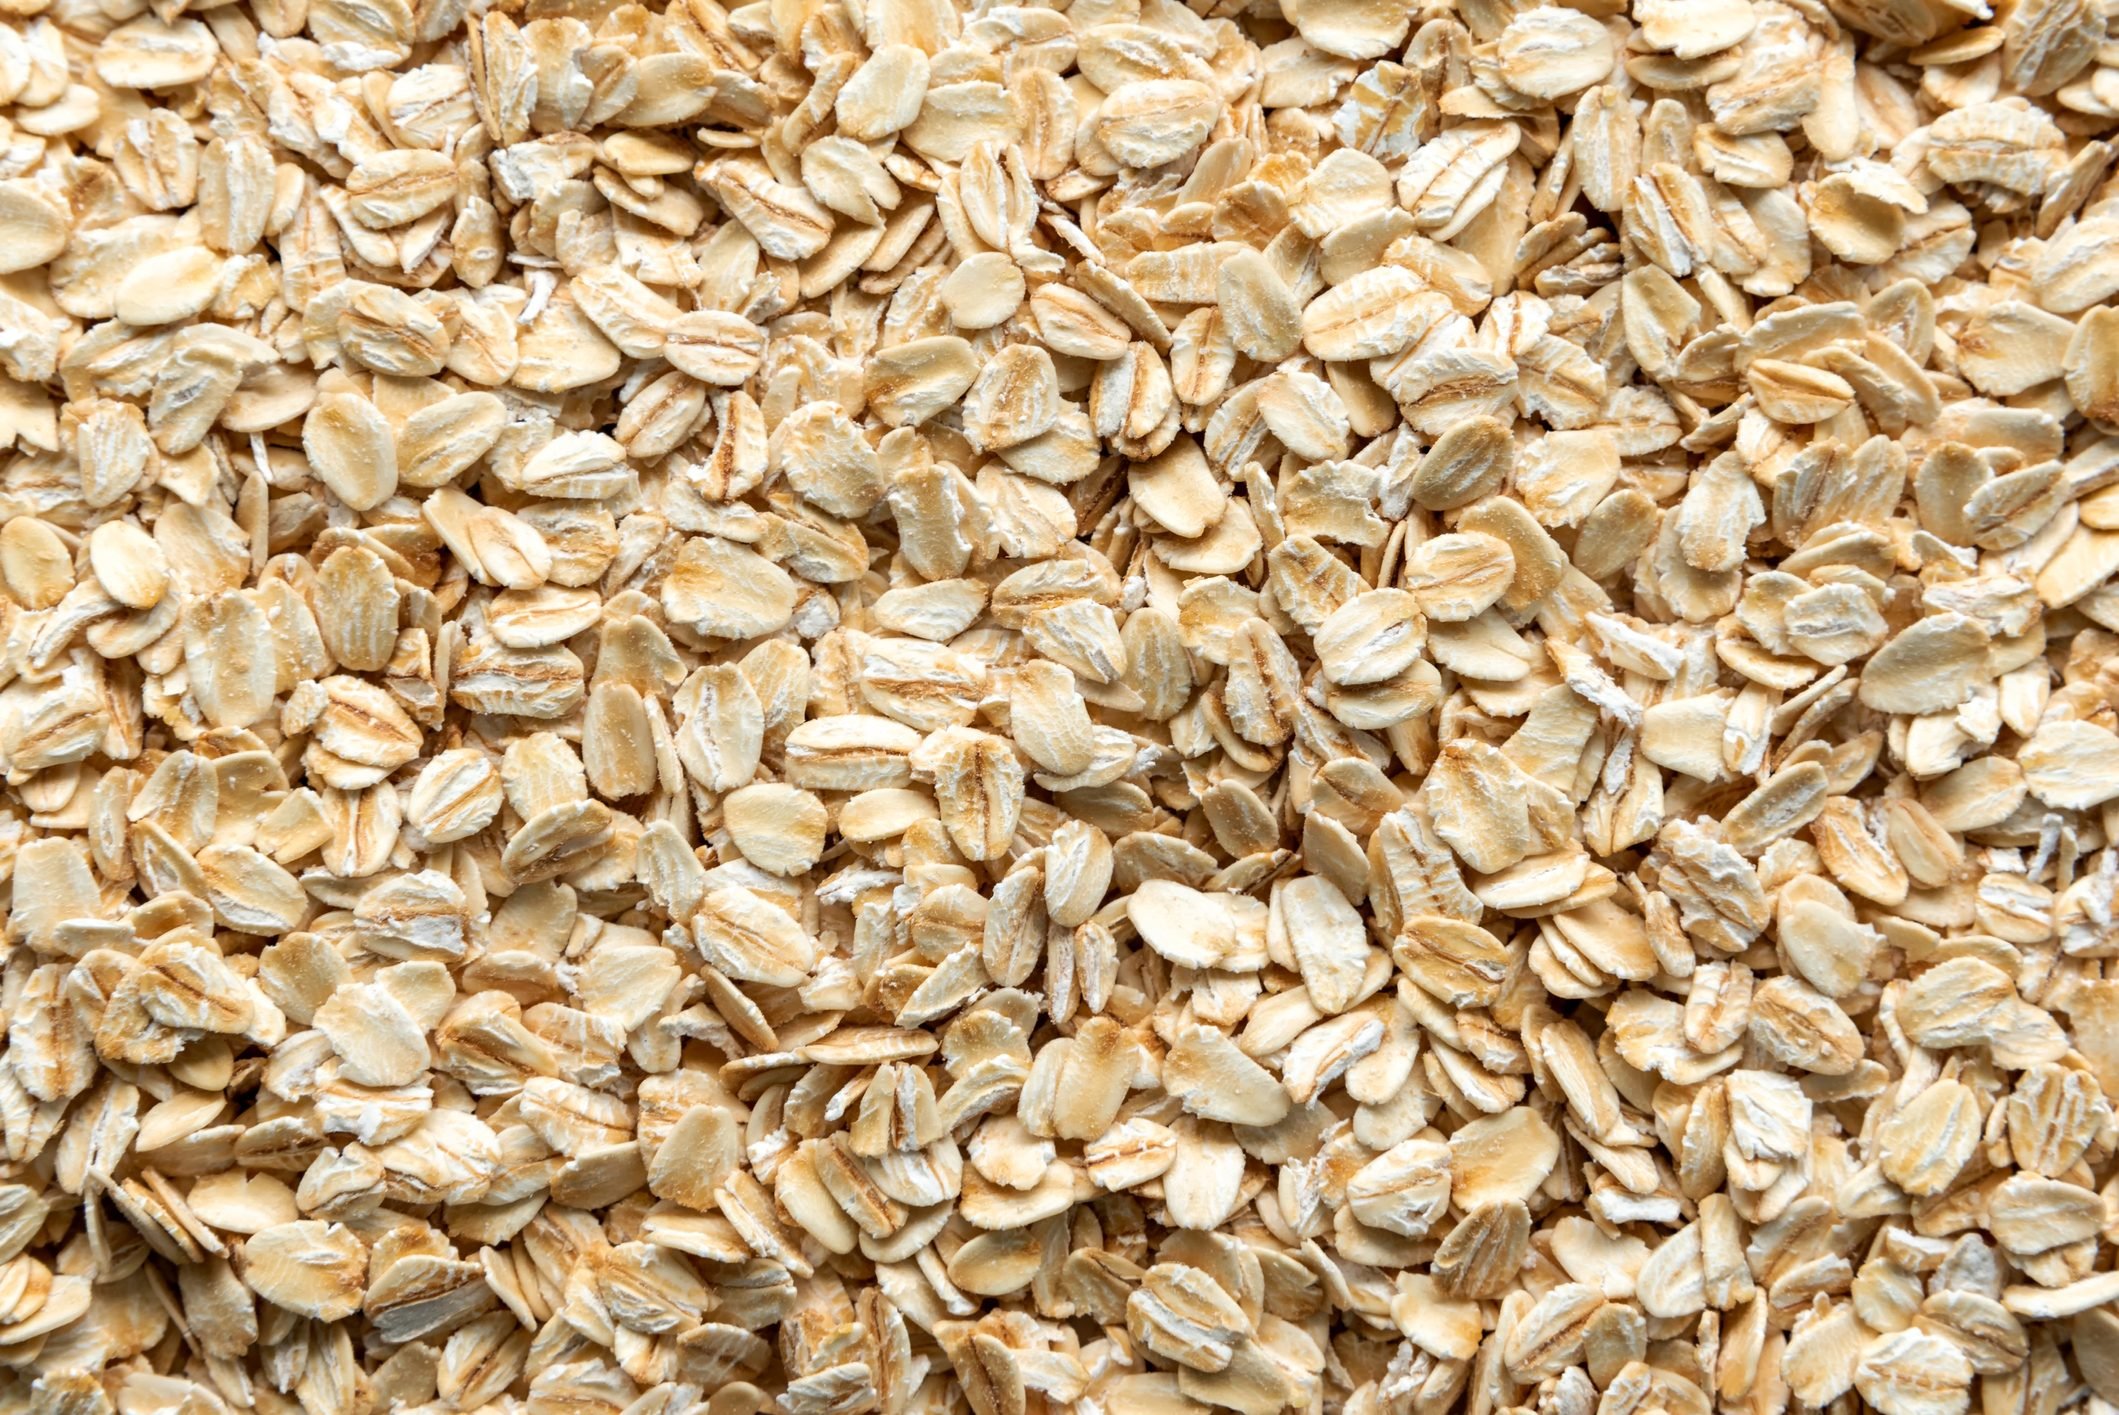 This Iconic Oatmeal Brand Just Recalled Oat, Cereal and Granola Products in All 50 States